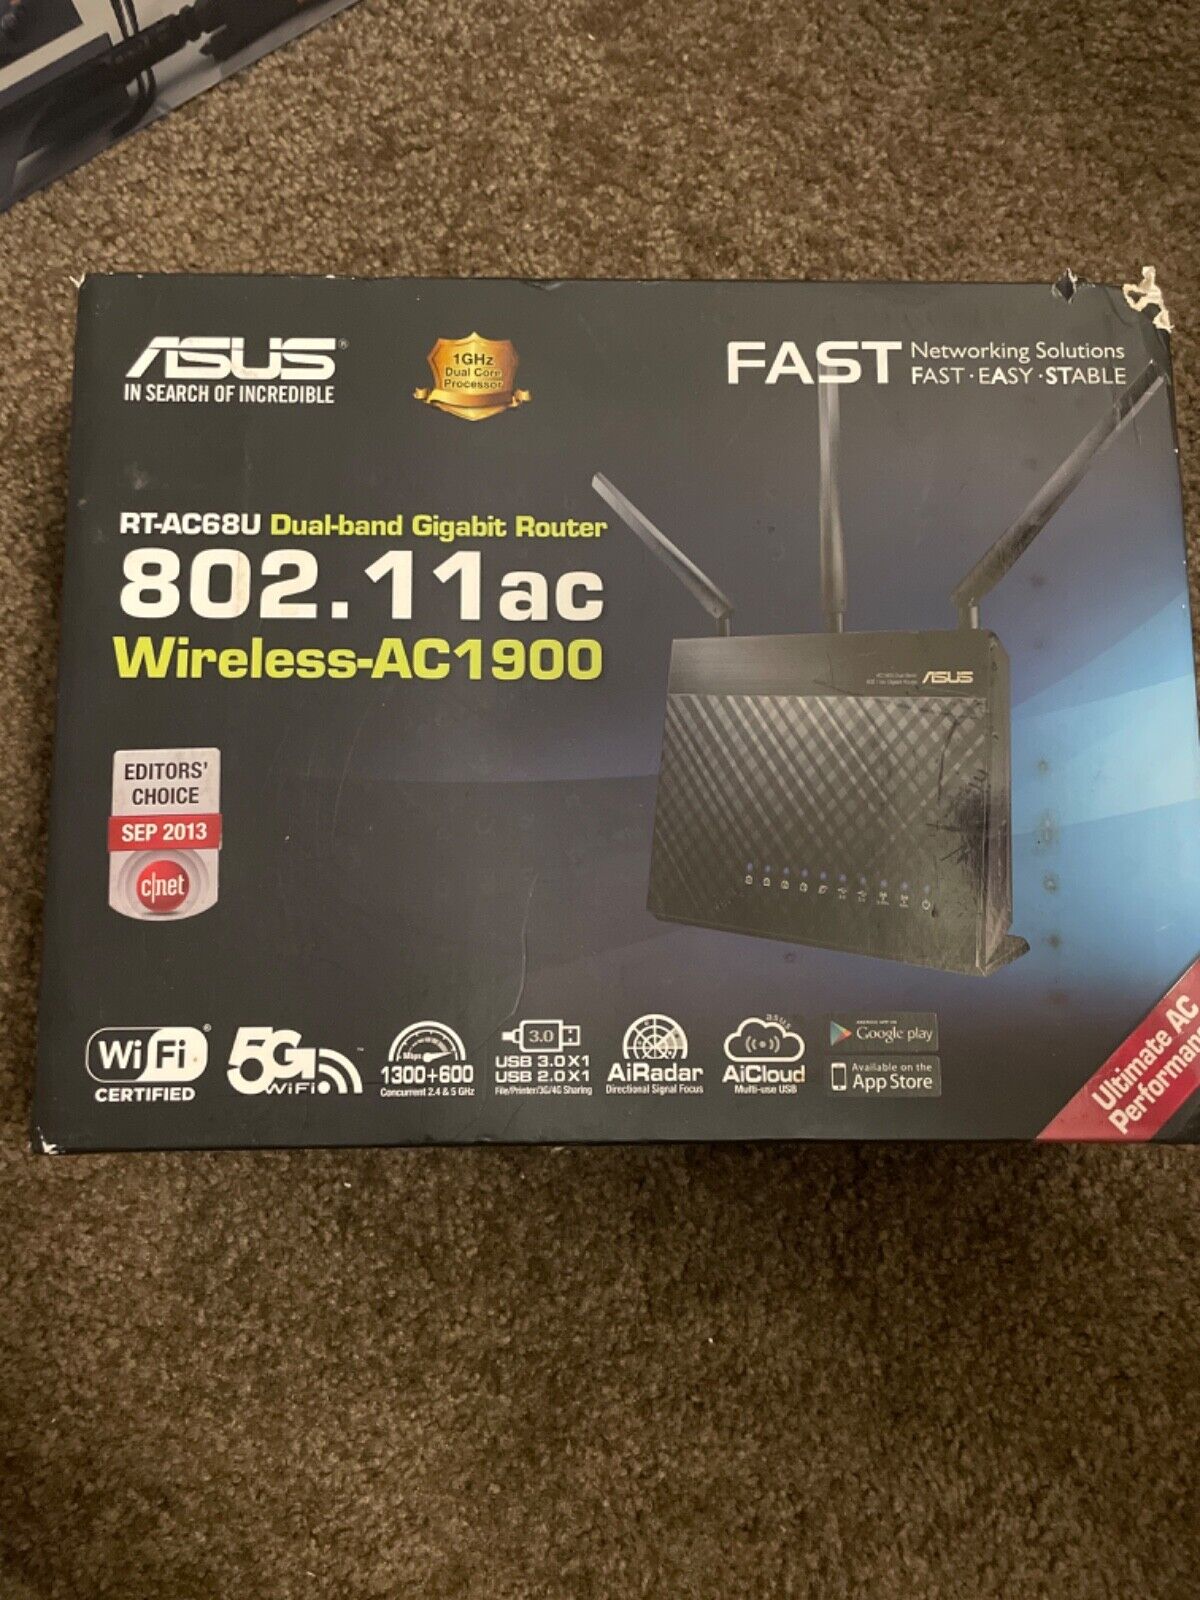 ASUS RT-AC68R Wireless-AC1900 Dual-Band Gigabit Router 802.11ac Gaming/Streaming